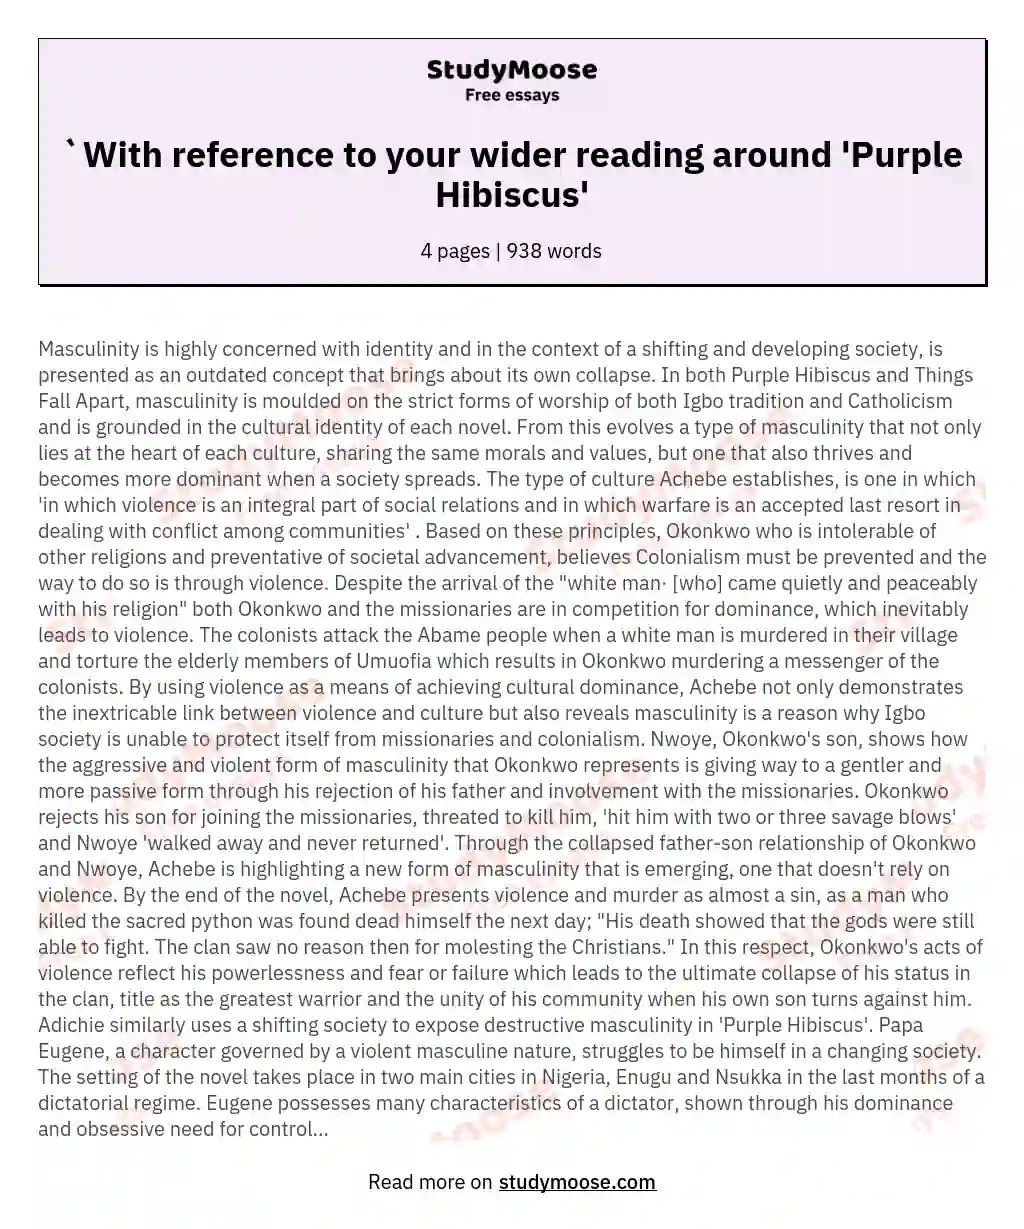 `With reference to your wider reading around 'Purple Hibiscus'